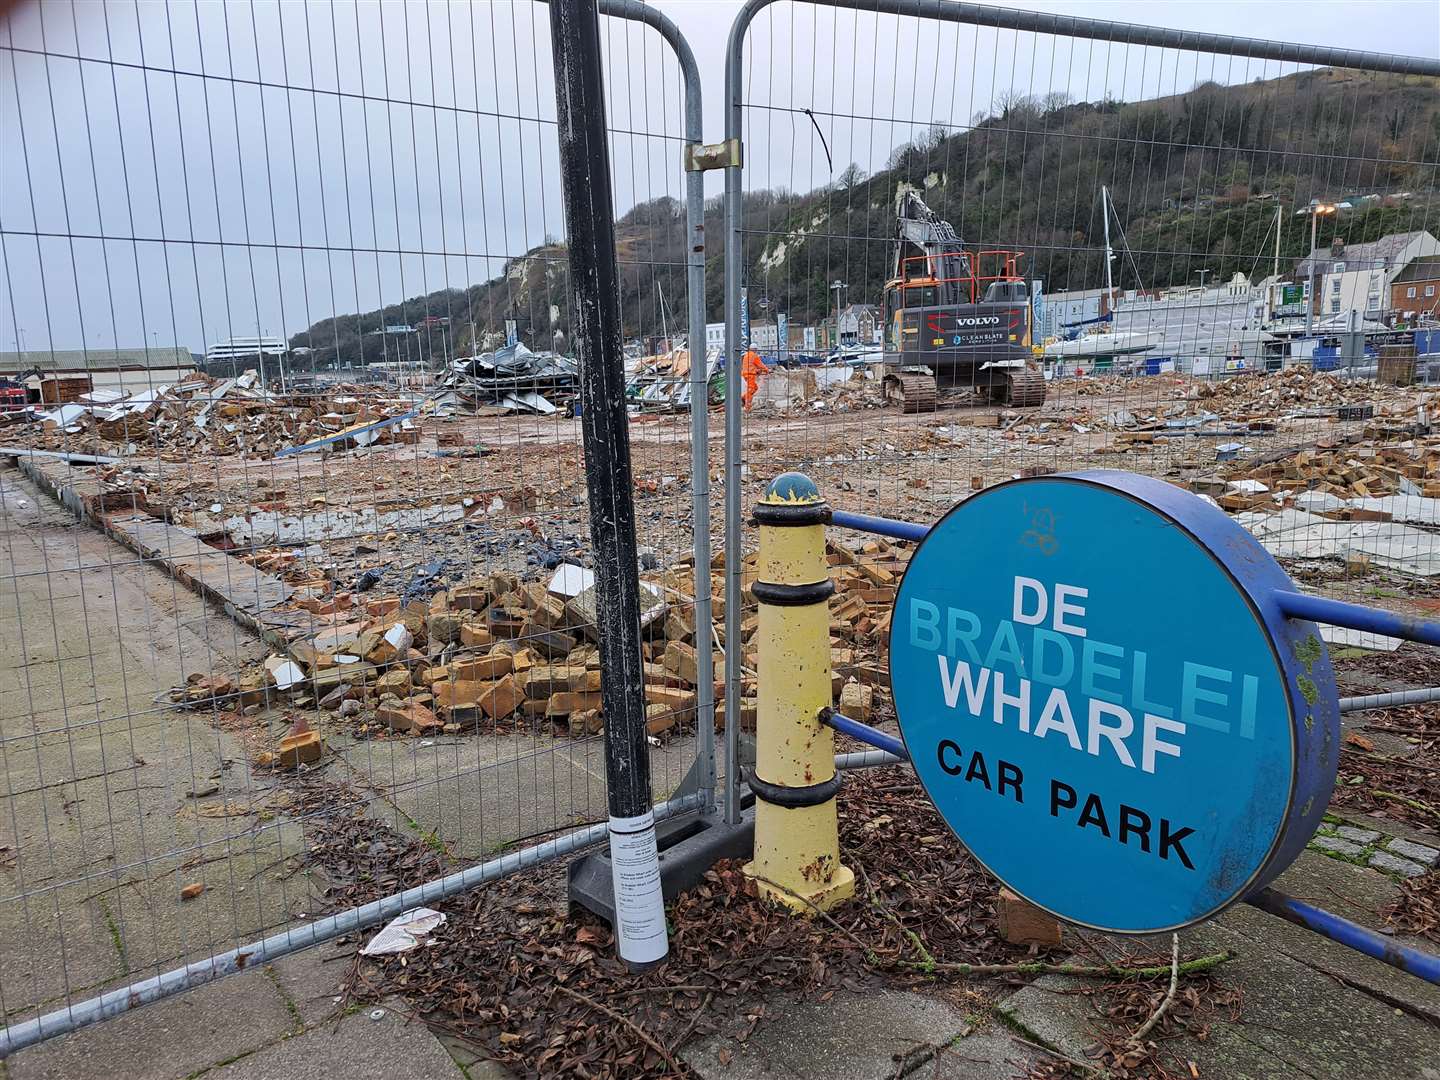 De Bradelei Wharf in Dover has now been torn down, after closing earlier this year following rising costs